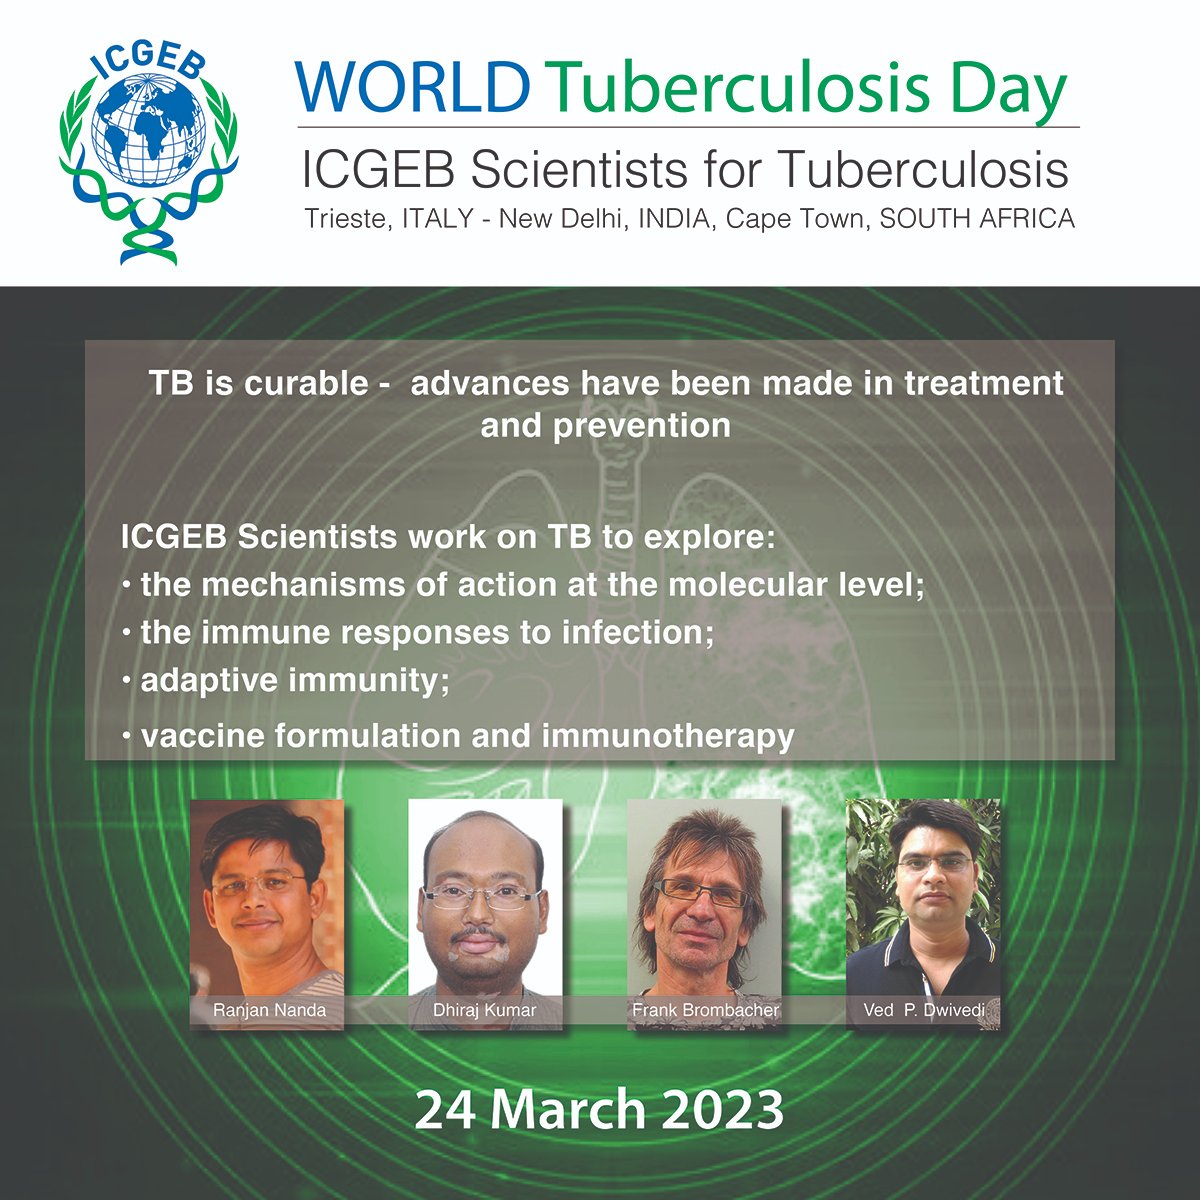 24 March 2023 is World Tuberculosis Day. We celebrate our scientists whose work advances treatment and prevention of TB
#TheClockIsTicking #EndTB #WorldTBDay 
👉 icgeb.org/the-faculty/